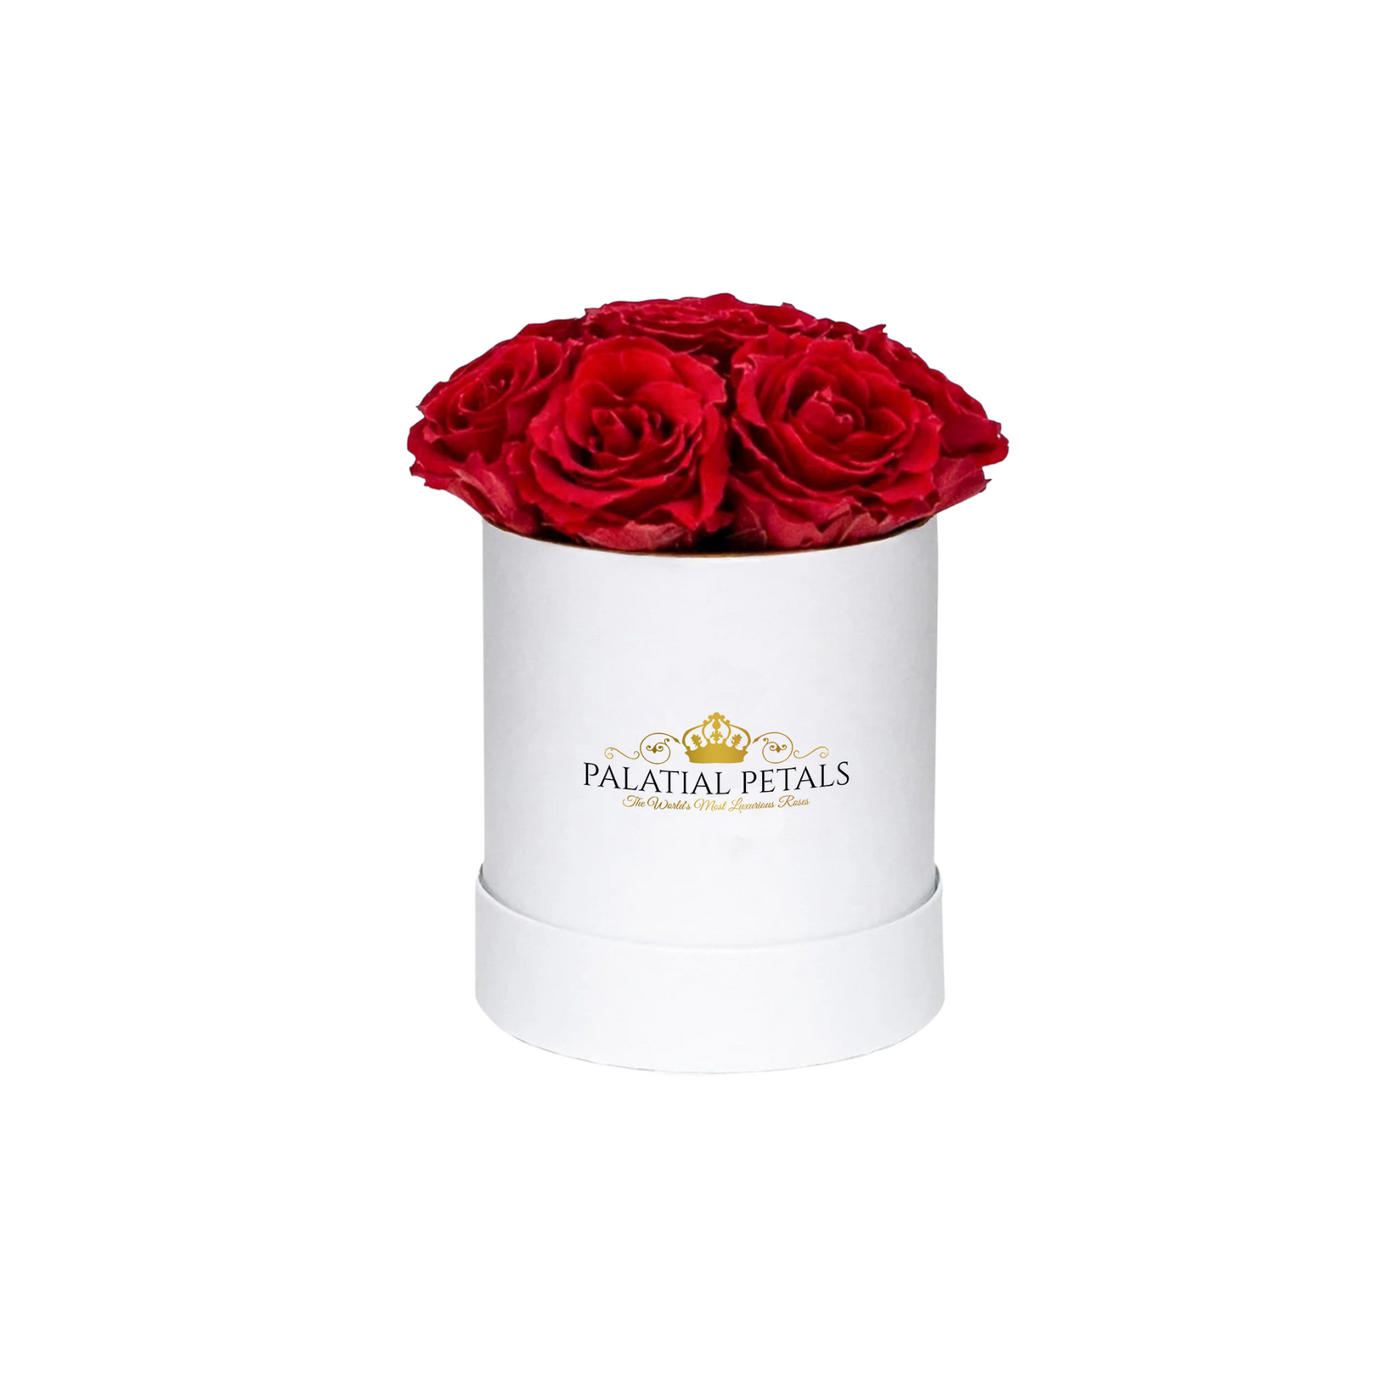 Red Roses That Last A Year - Petite Rose Box